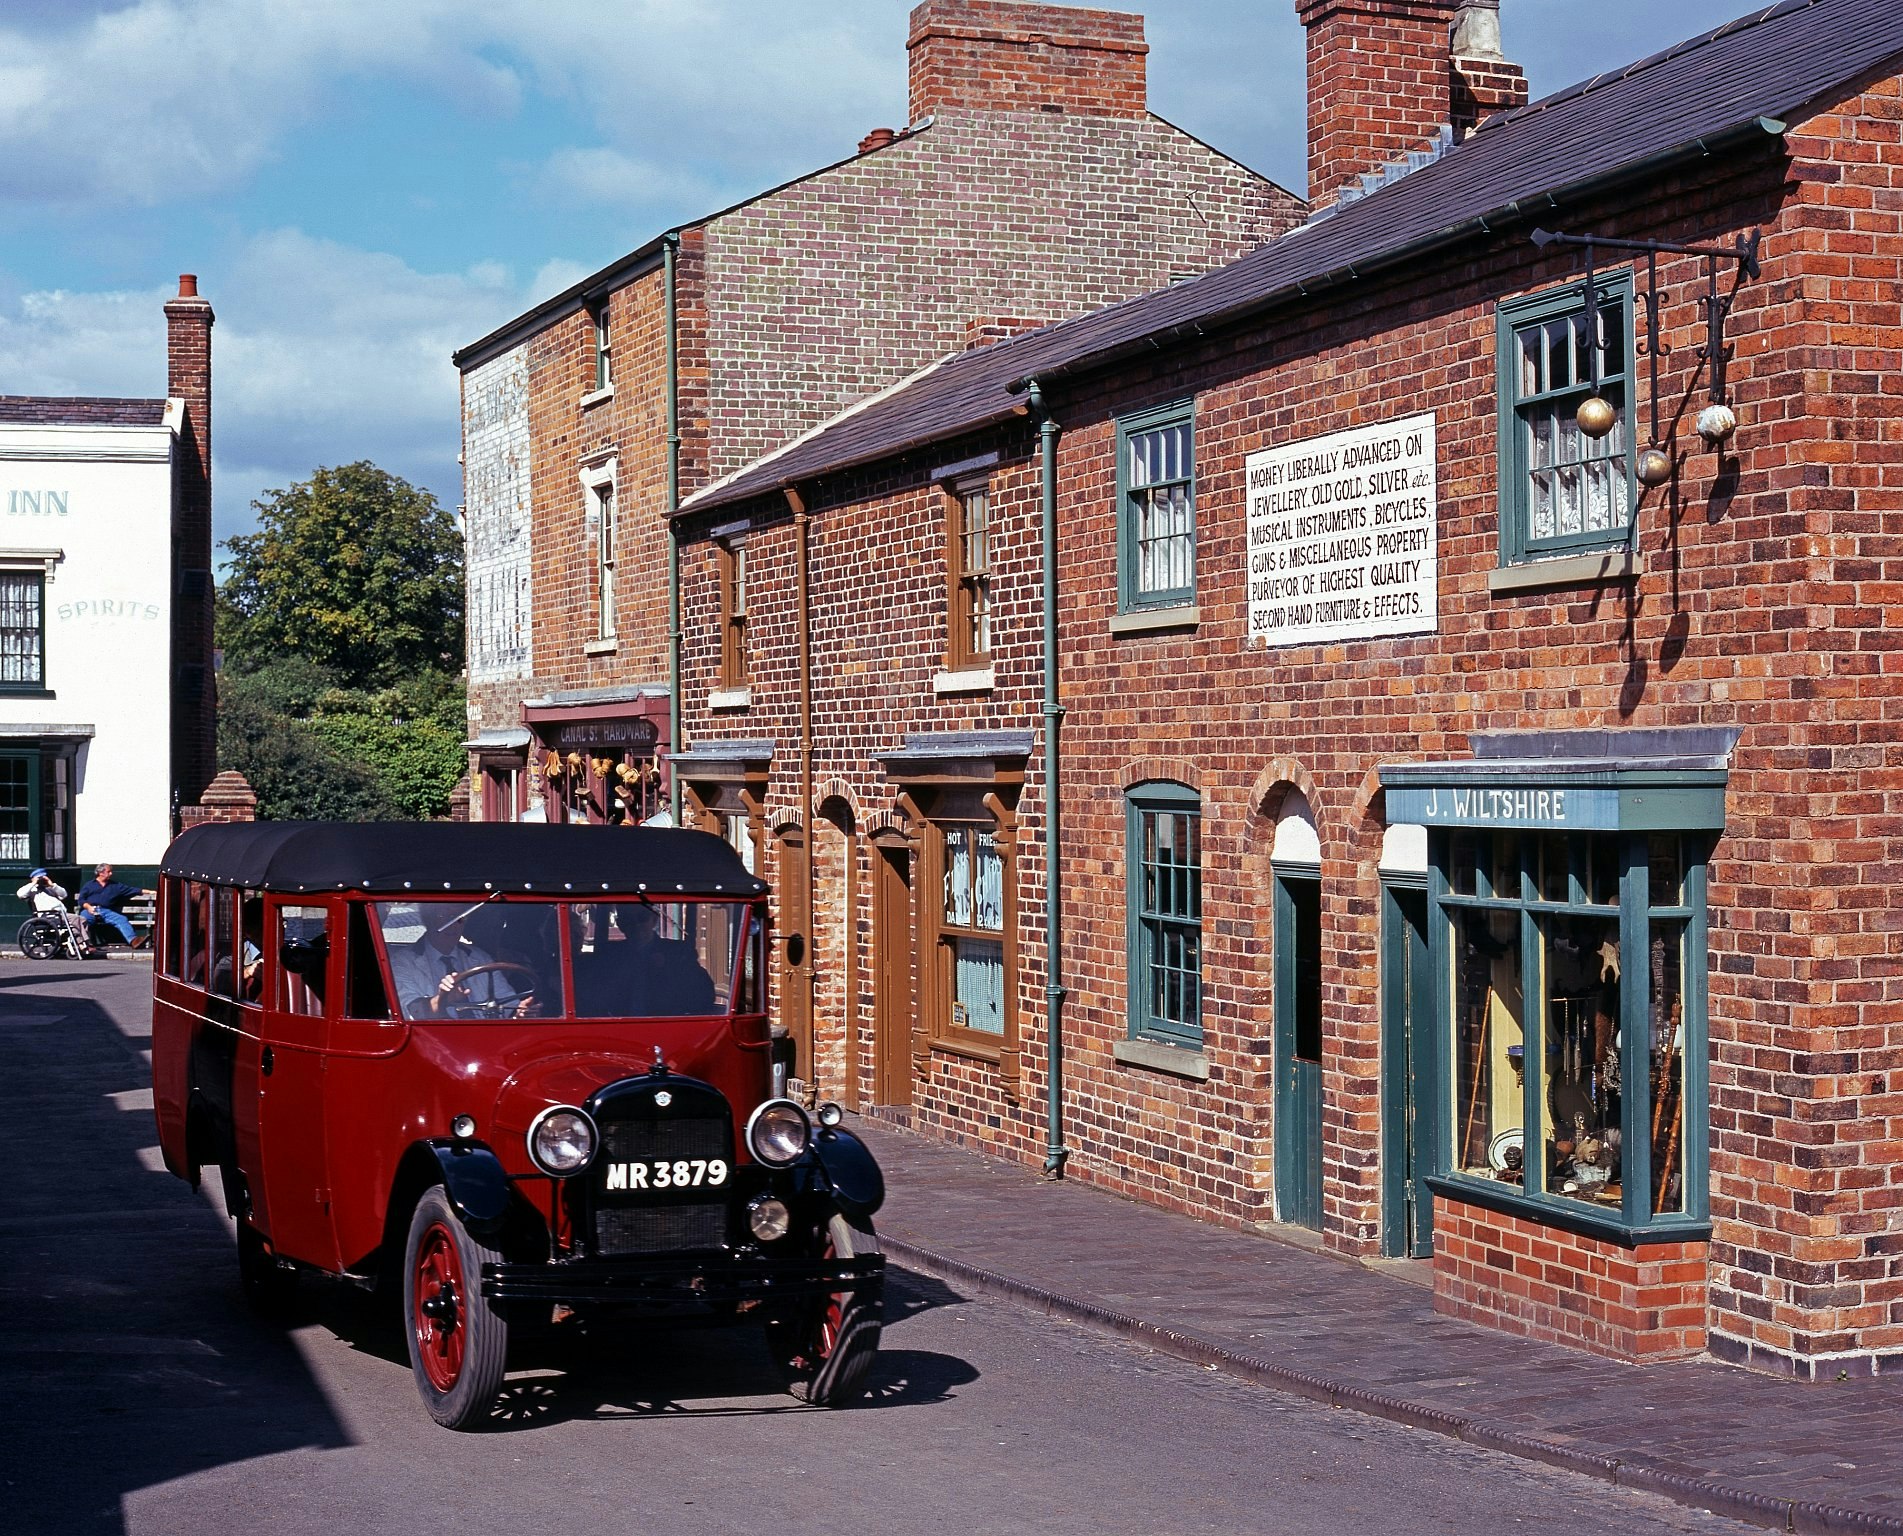 A red vintage car being driven along a recreated historic street of redbrick terraced homes and shops.